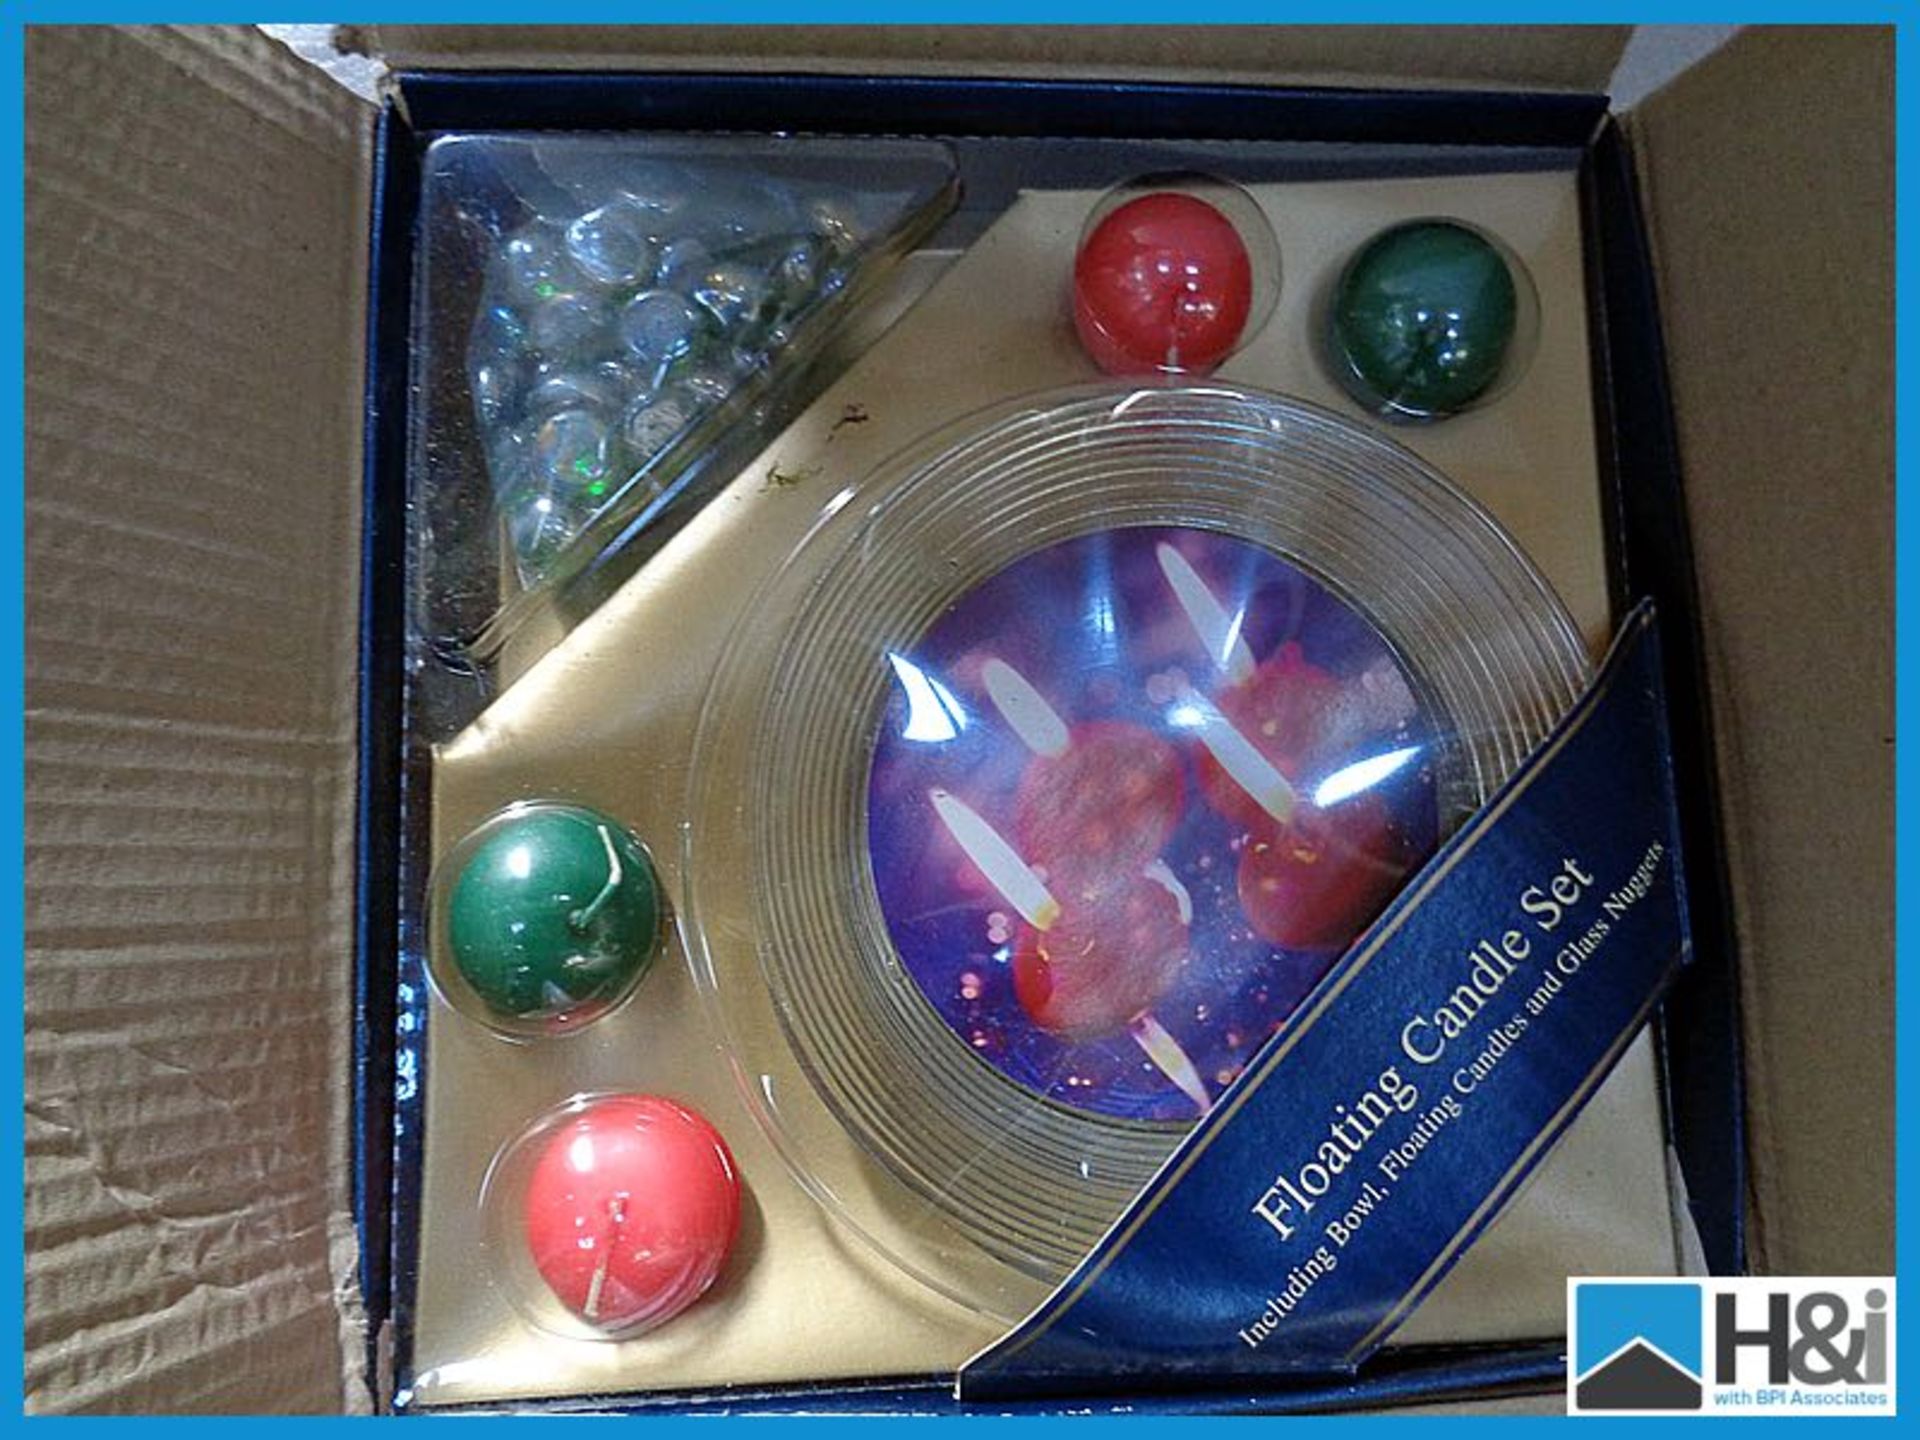 1 box of 3 x Floating candle set new perfect for xmas or any party !!!!! Appraisal: Good Serial